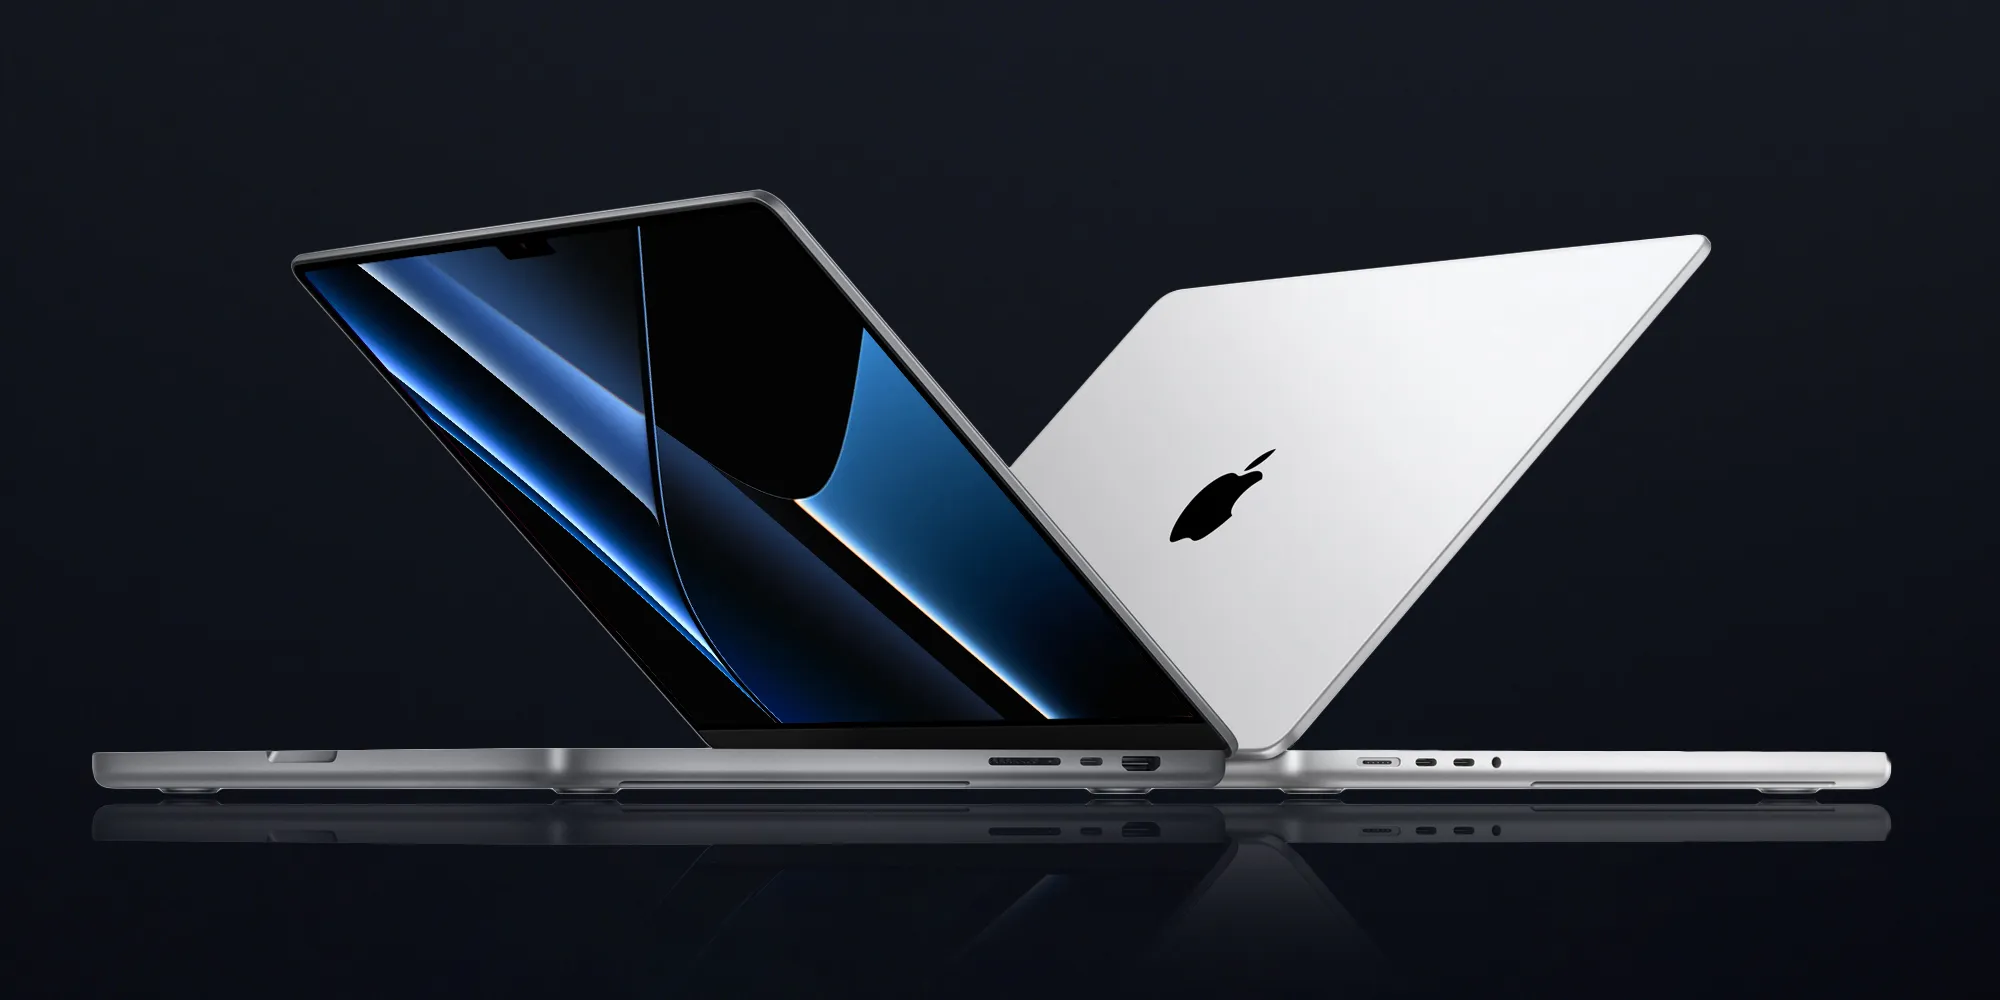 Cool MacBook Pro Features That Most People Don't Know About